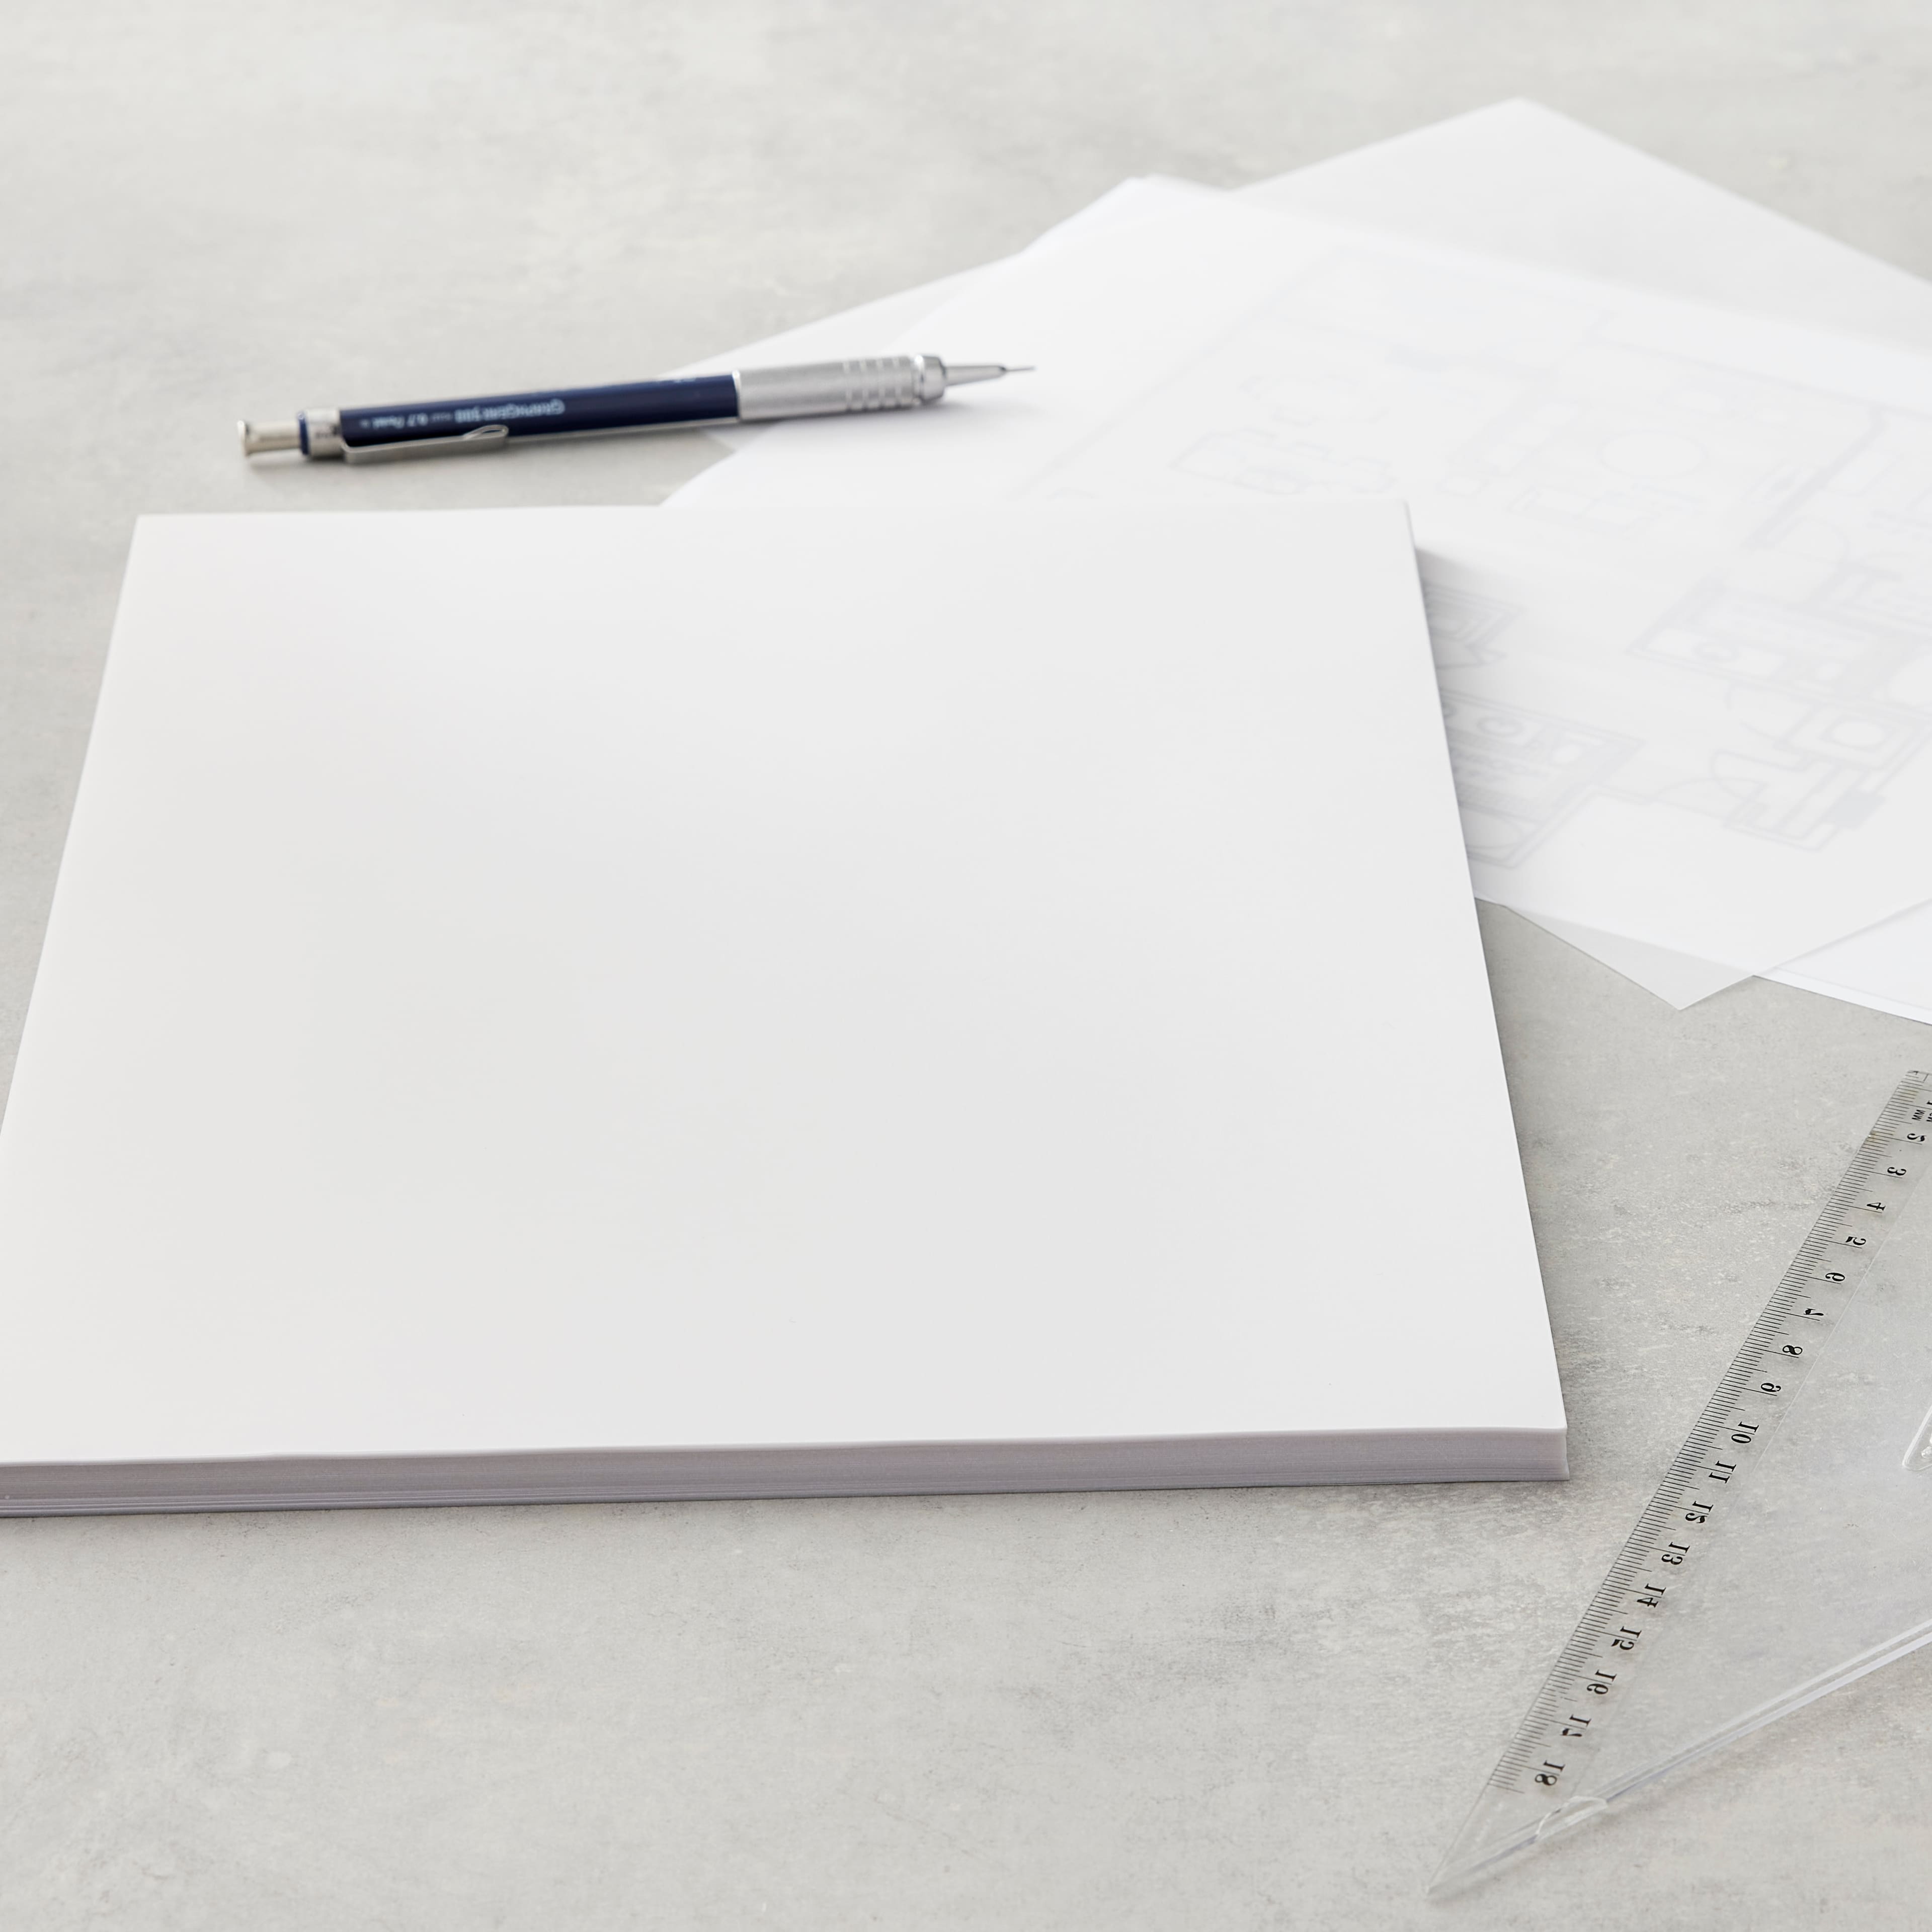 Clear 8.5&#x22; x 11&#x22; Vellum Paper by Recollections&#x2122;, 100 Sheets